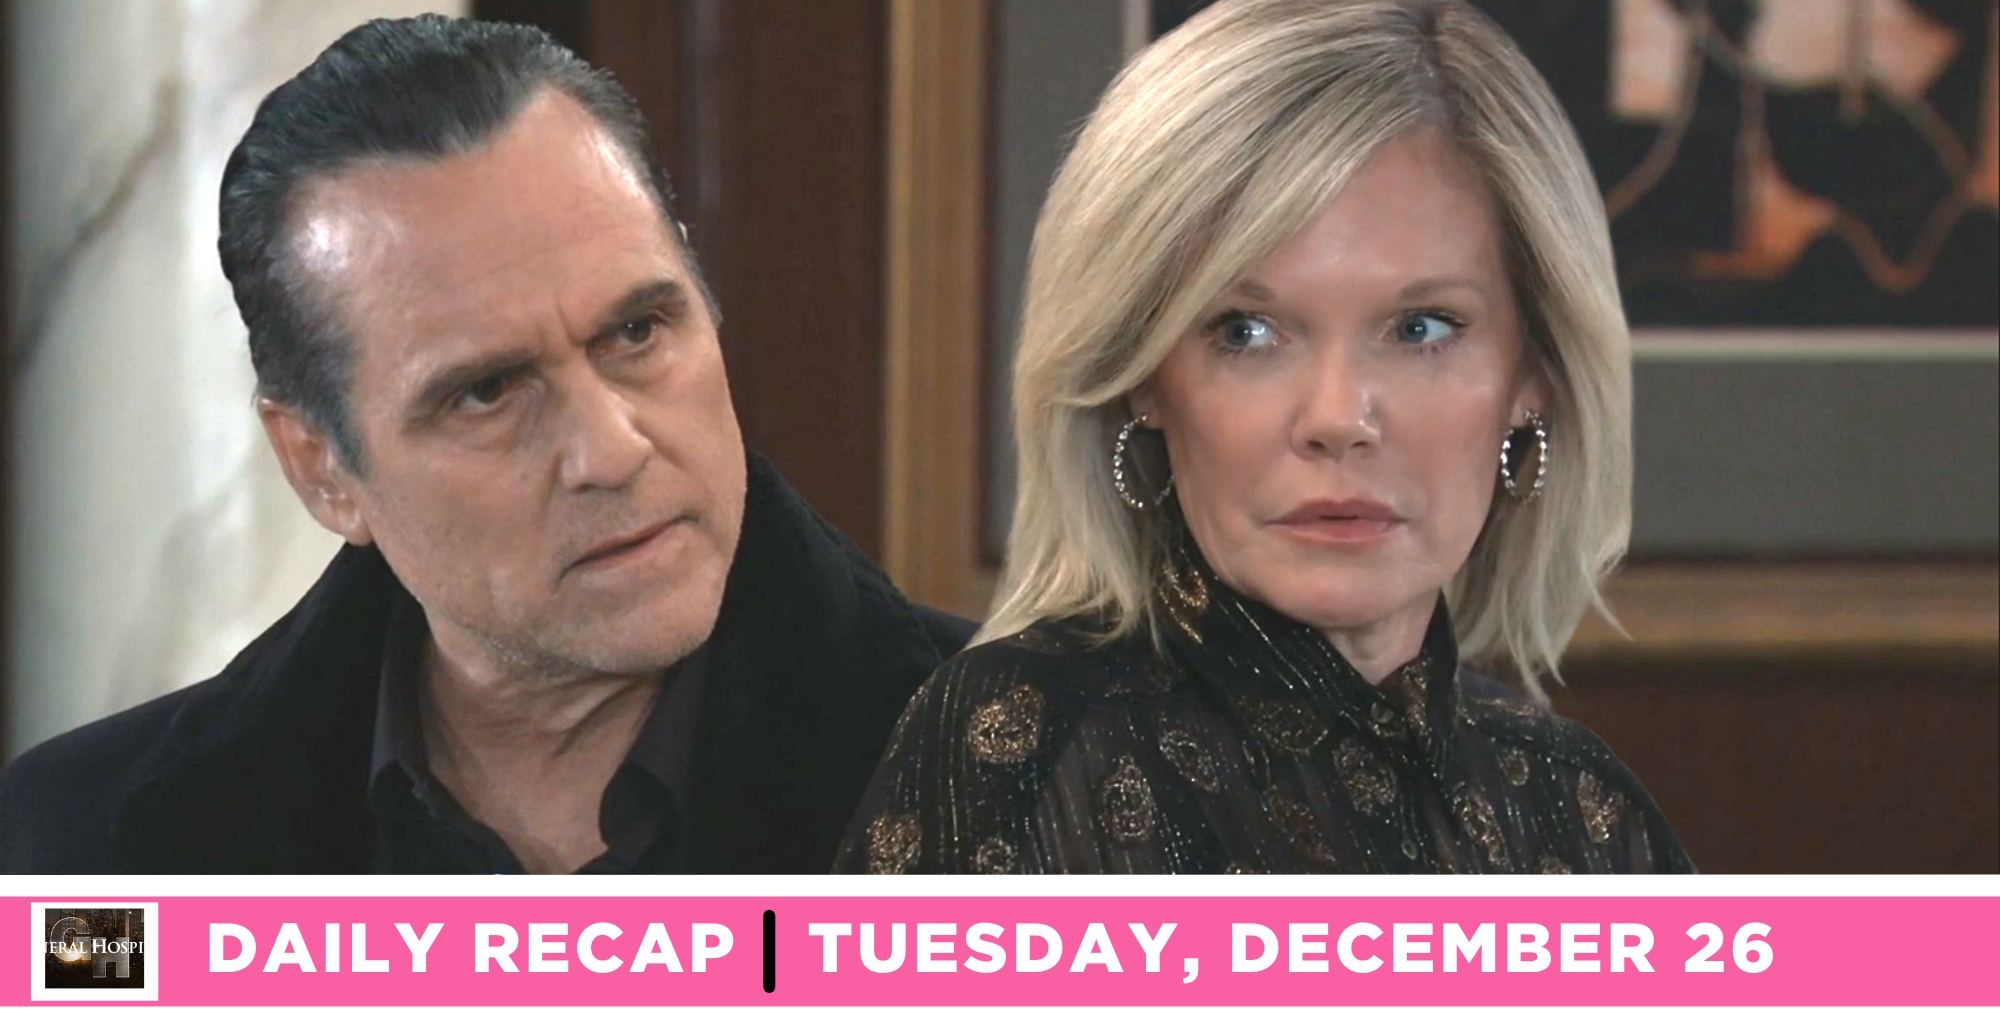 sonny corinthos is moving in ava jerome on general hospital recap for tuesday, december 26, 2023.